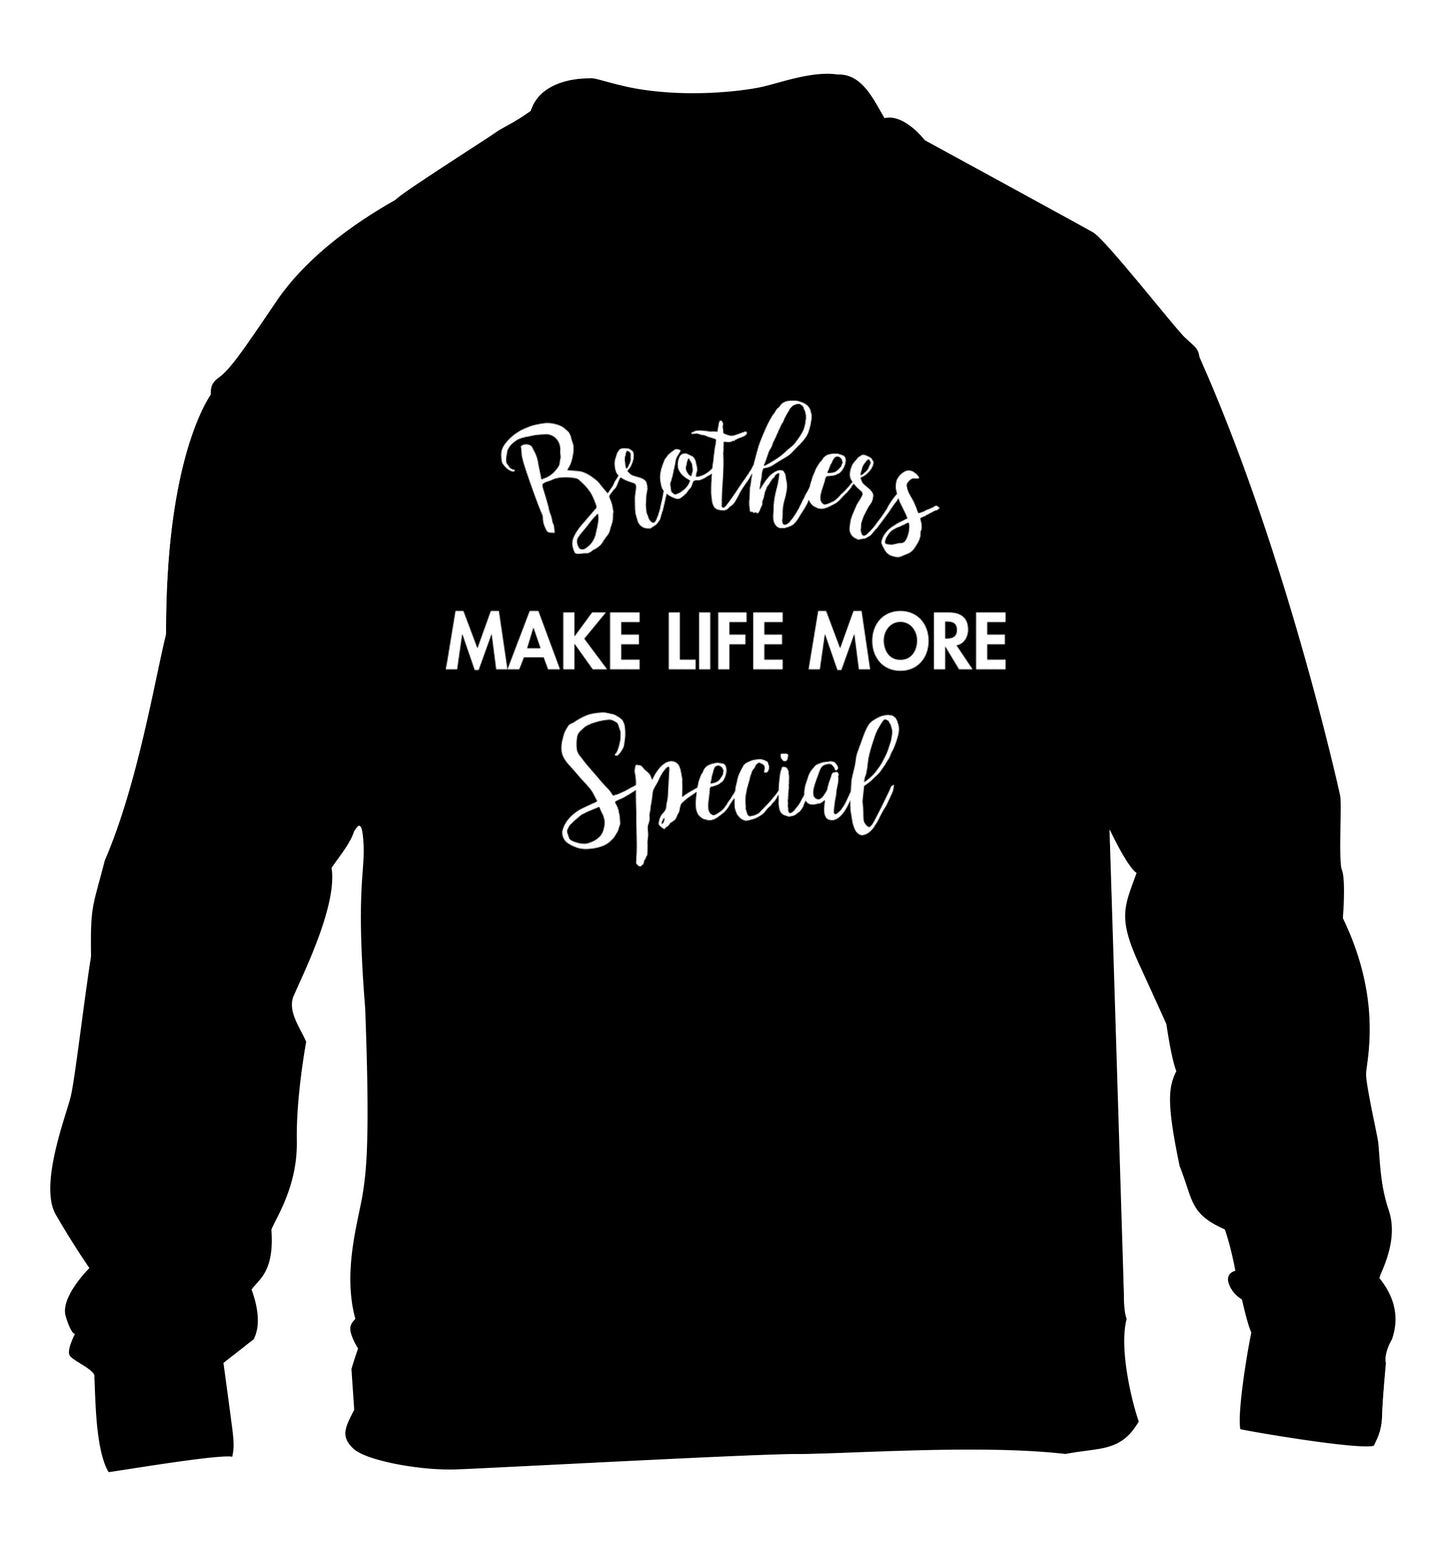 Brothers make life more special children's black sweater 12-14 Years